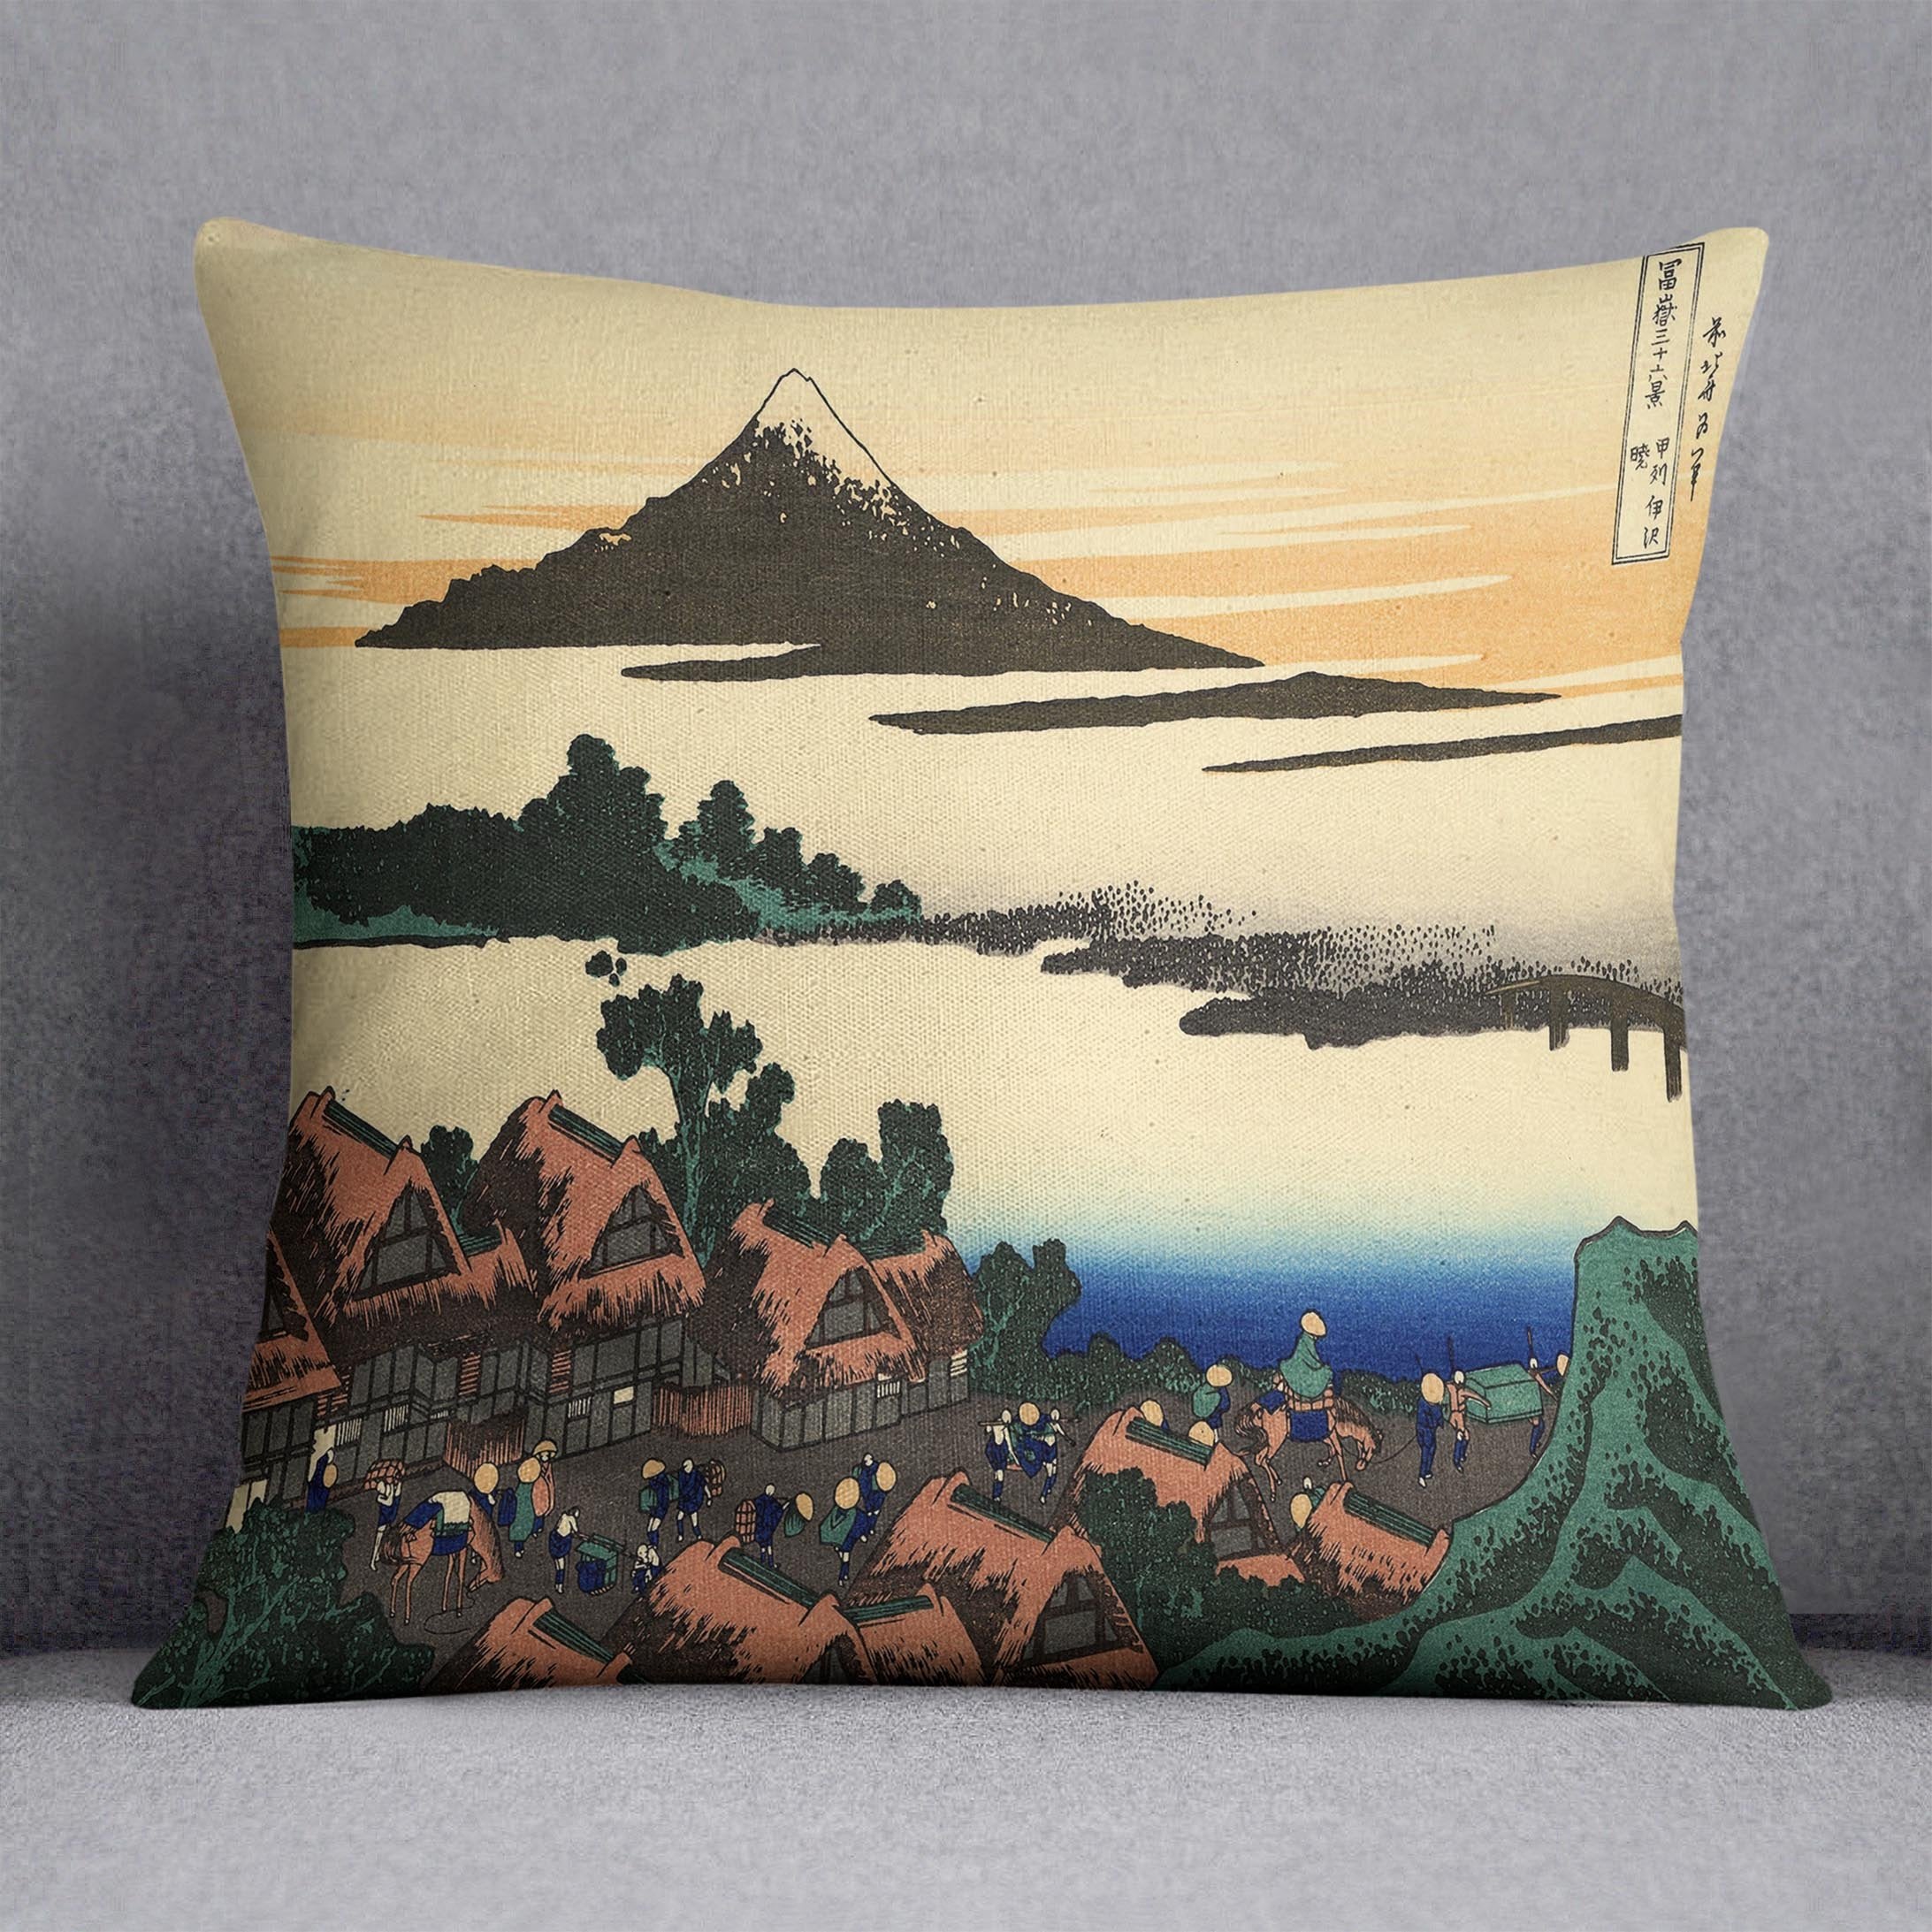 Dawn at Isawa in the Kai province by Hokusai Throw Pillow